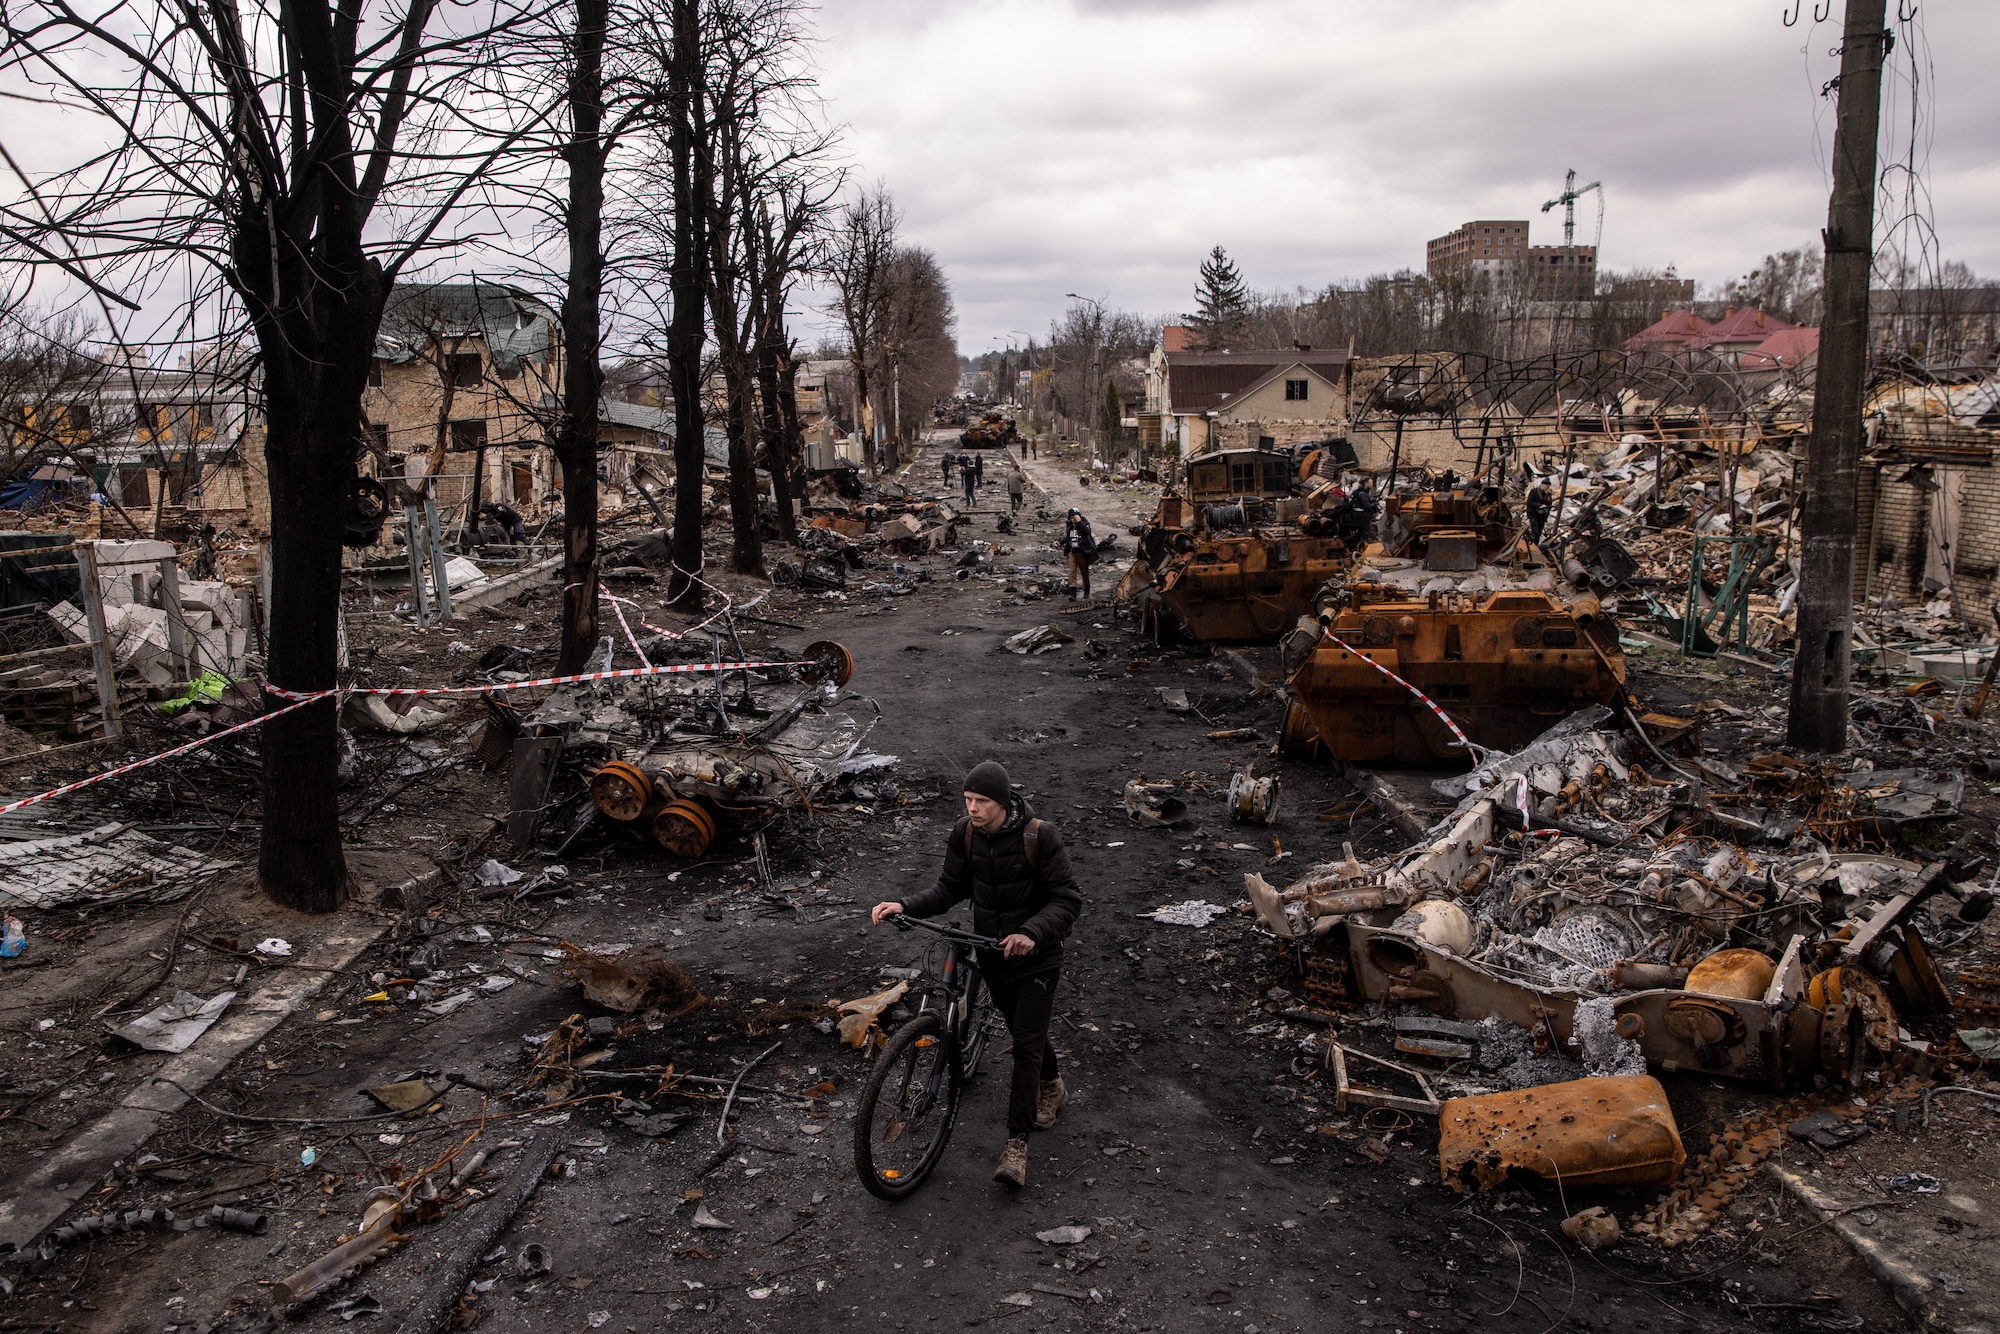  A man pushes his bike through debris and destroyed Russian military vehicles on April 06, 2022 in Bucha.